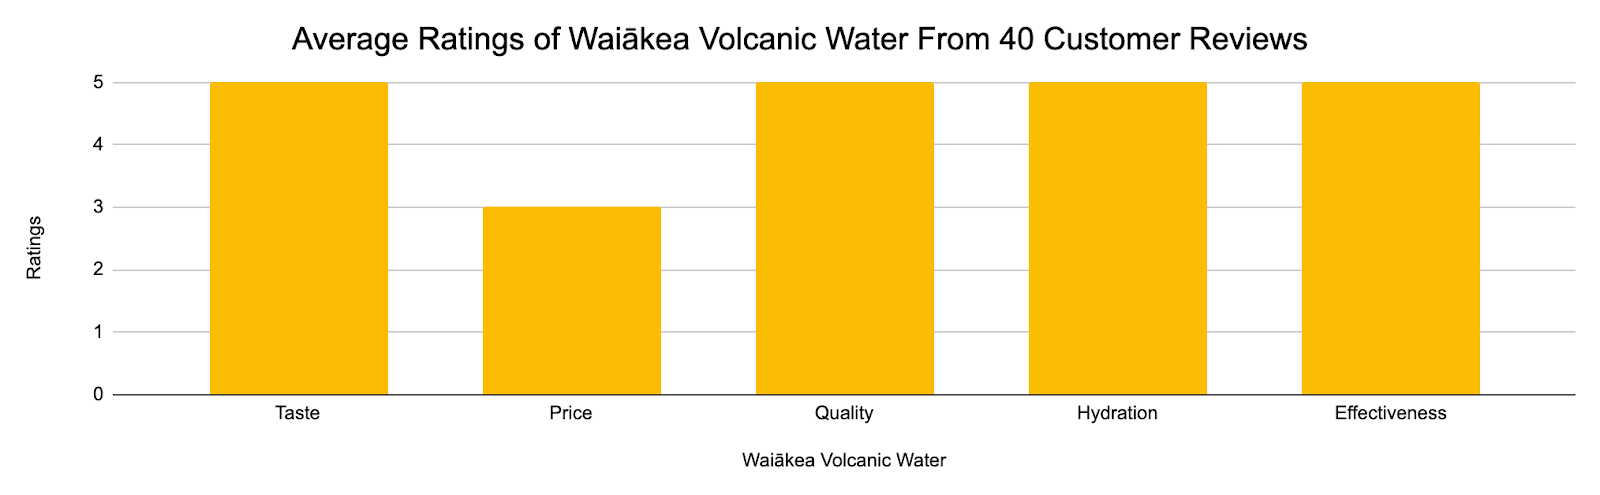 The image shows average ratings of Waiākea volcanic water from 40 customer reviews.